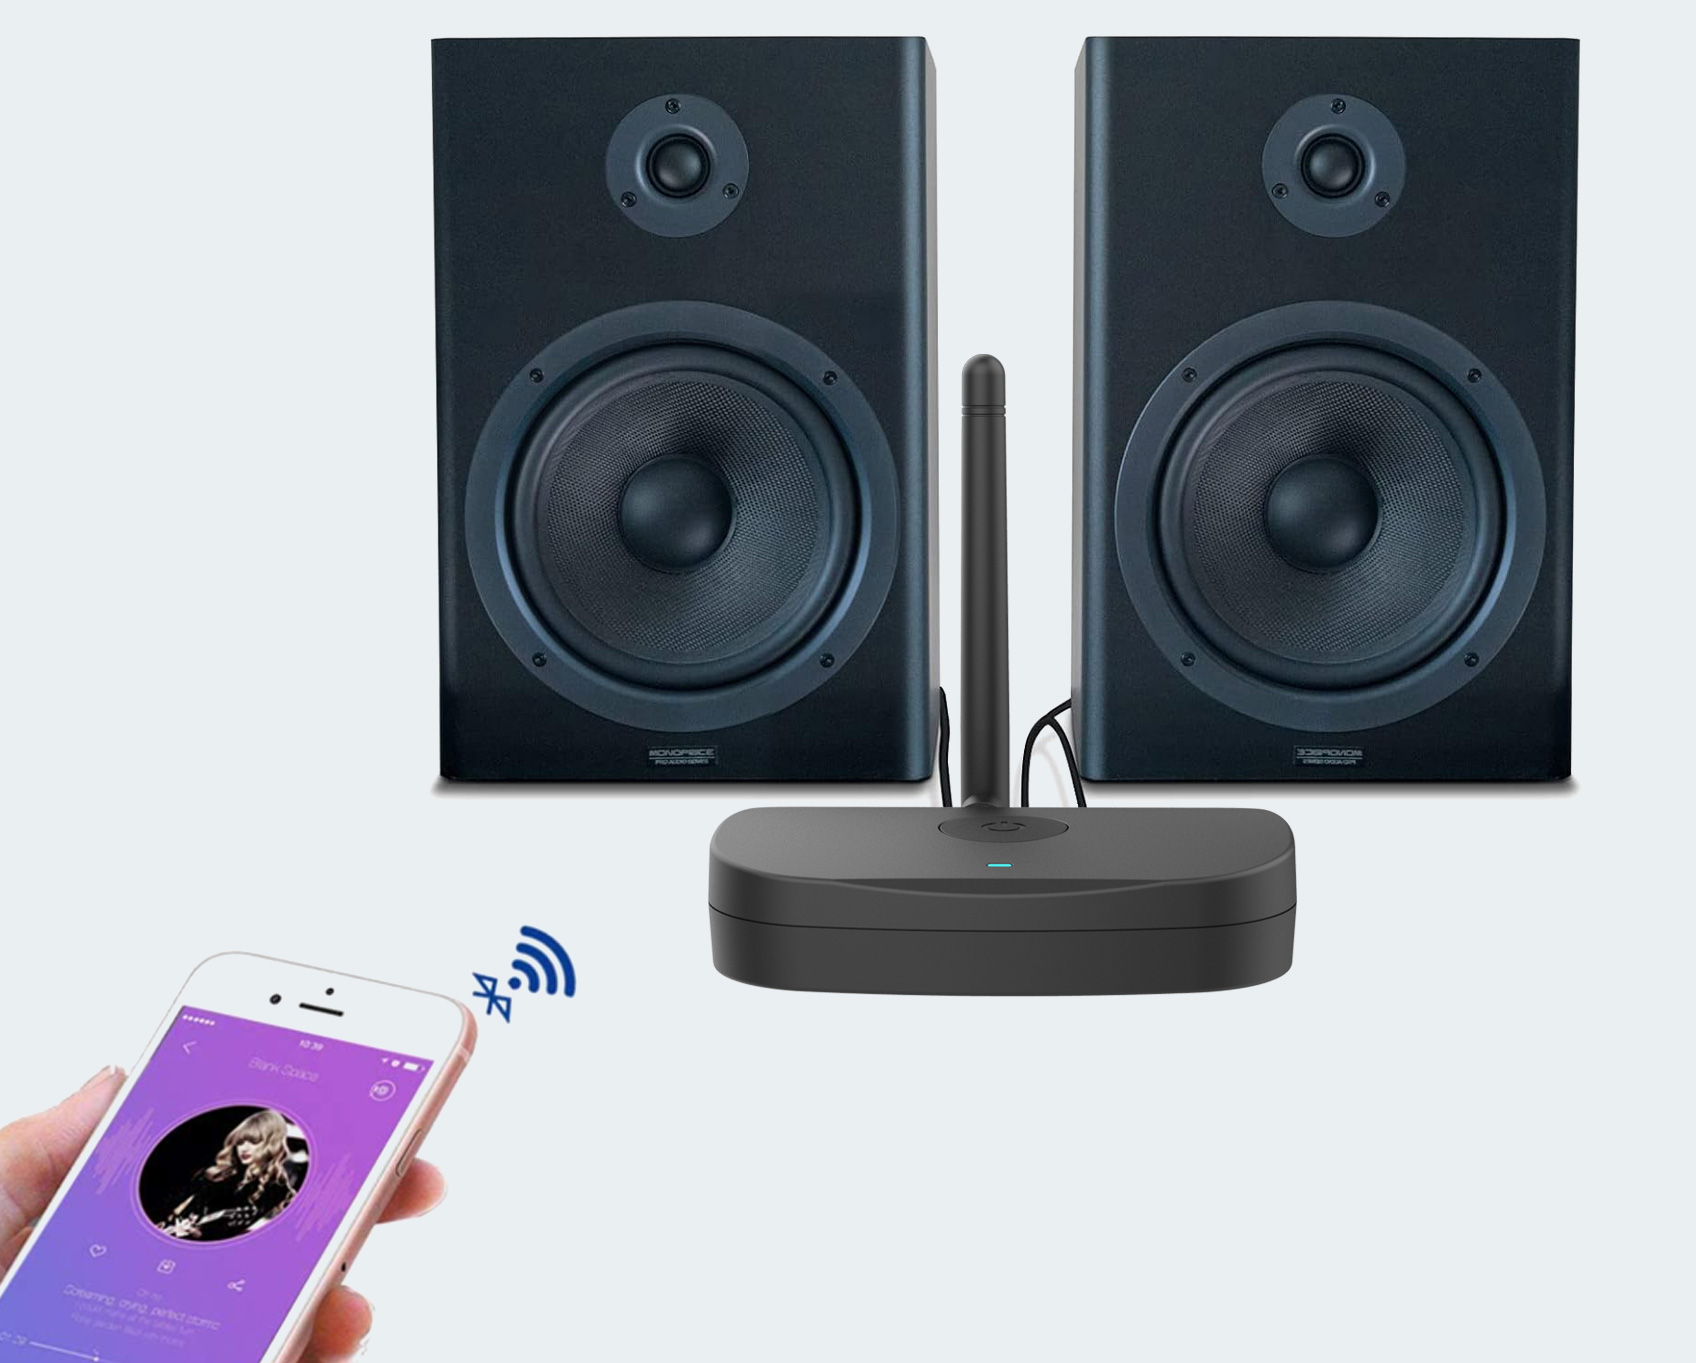 The role of Bluetooth receiver